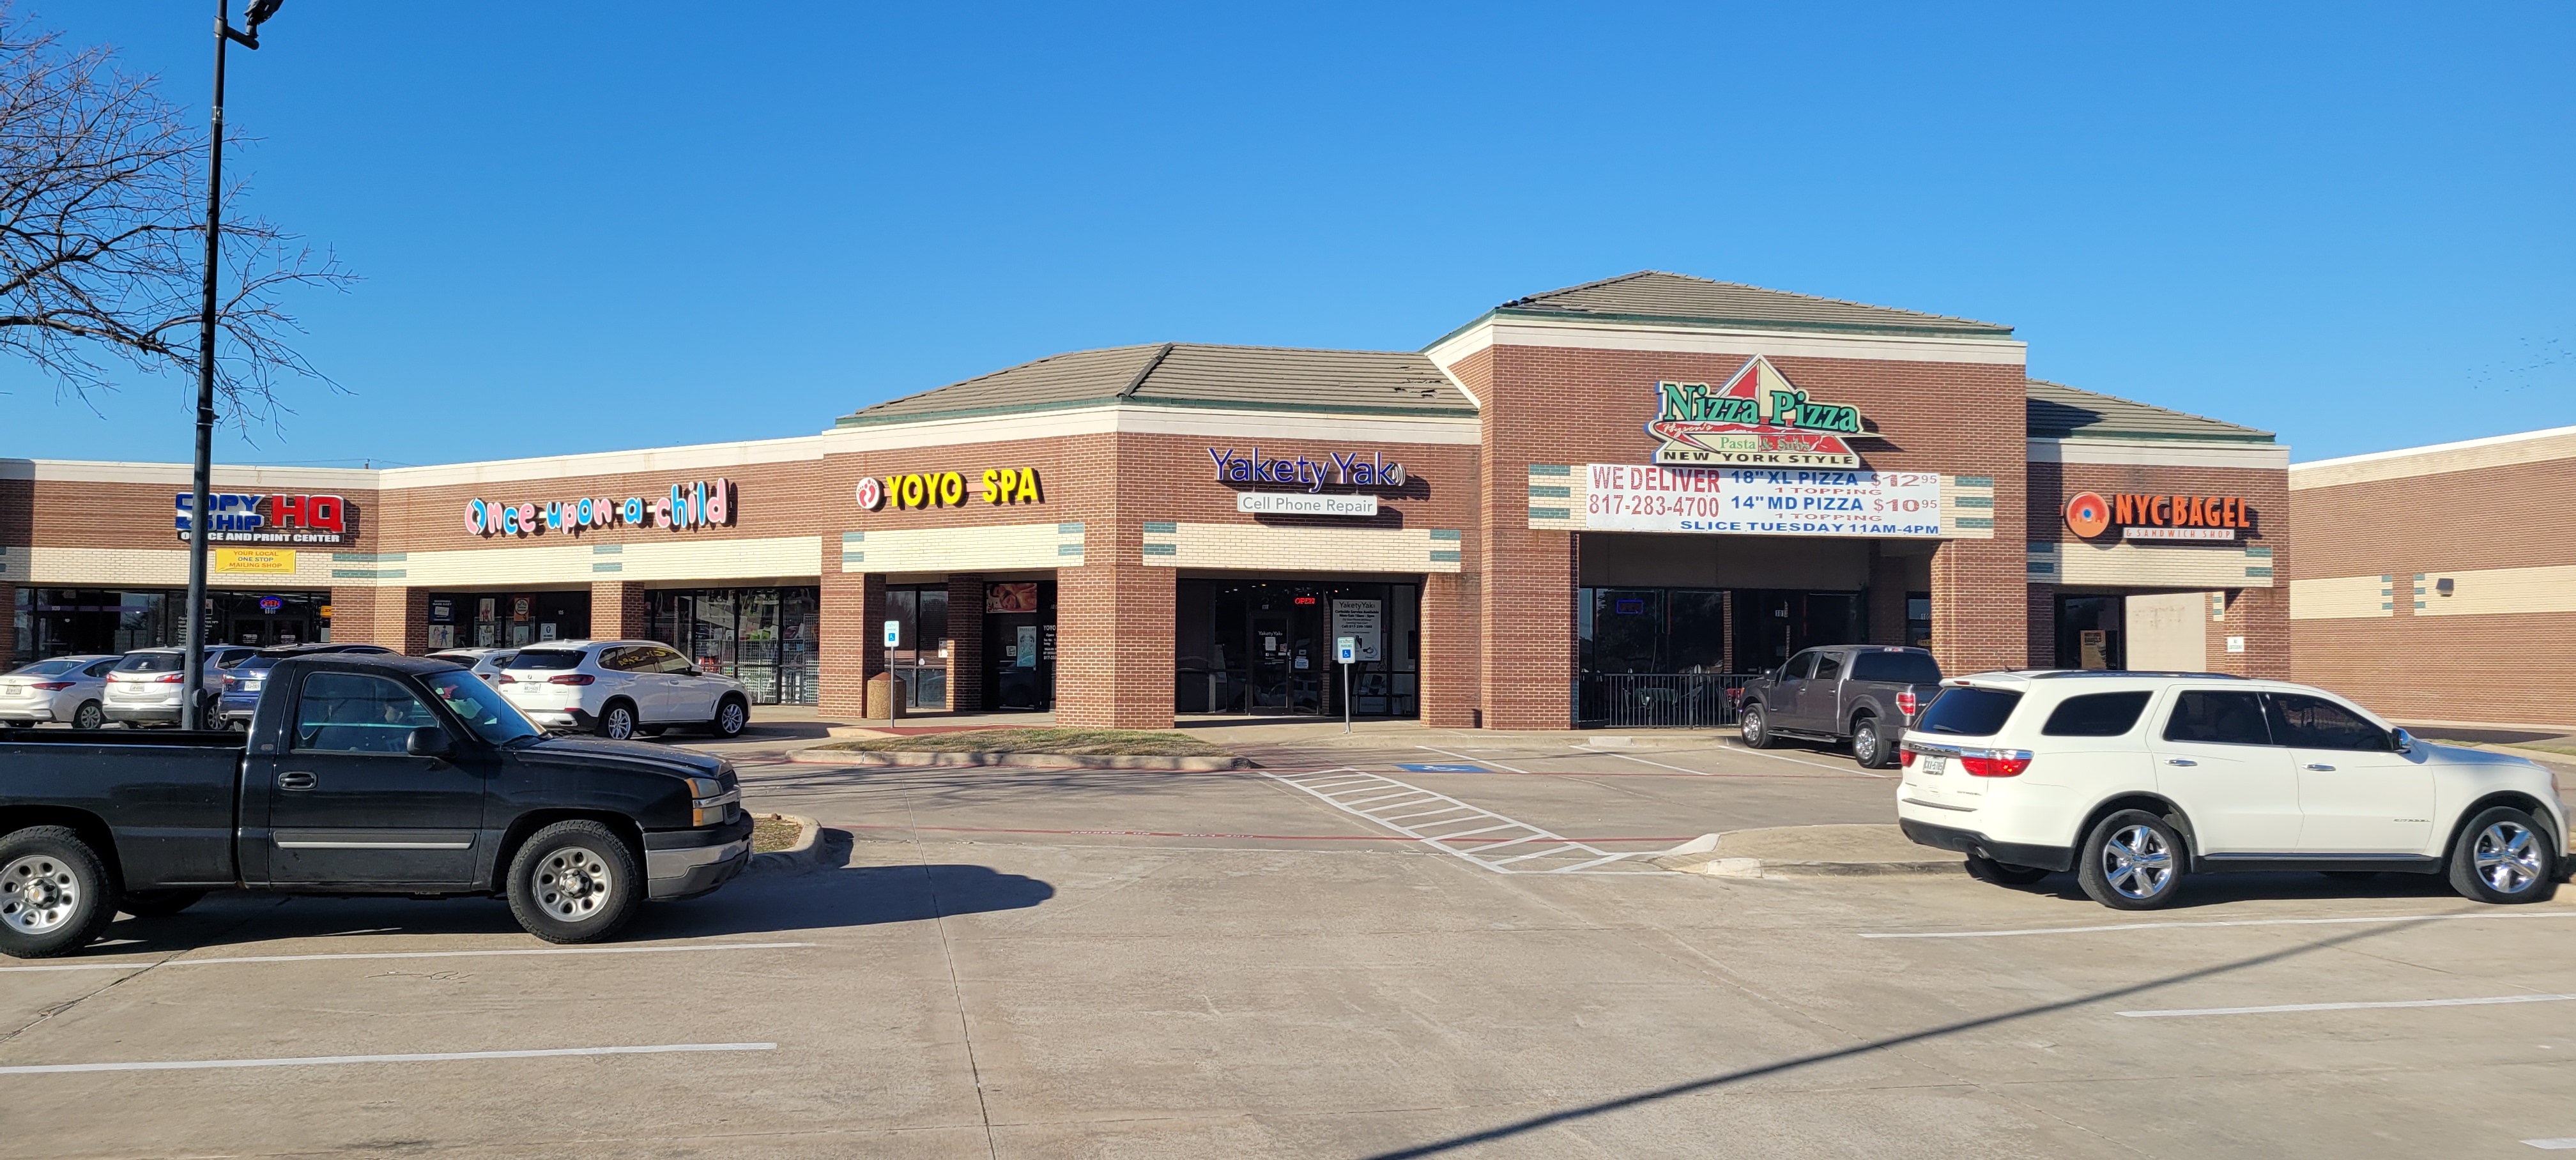 VISION COMMERCIAL BRINGS COLLEYVILLE SHOPPING CENTER TO 100% LEASED